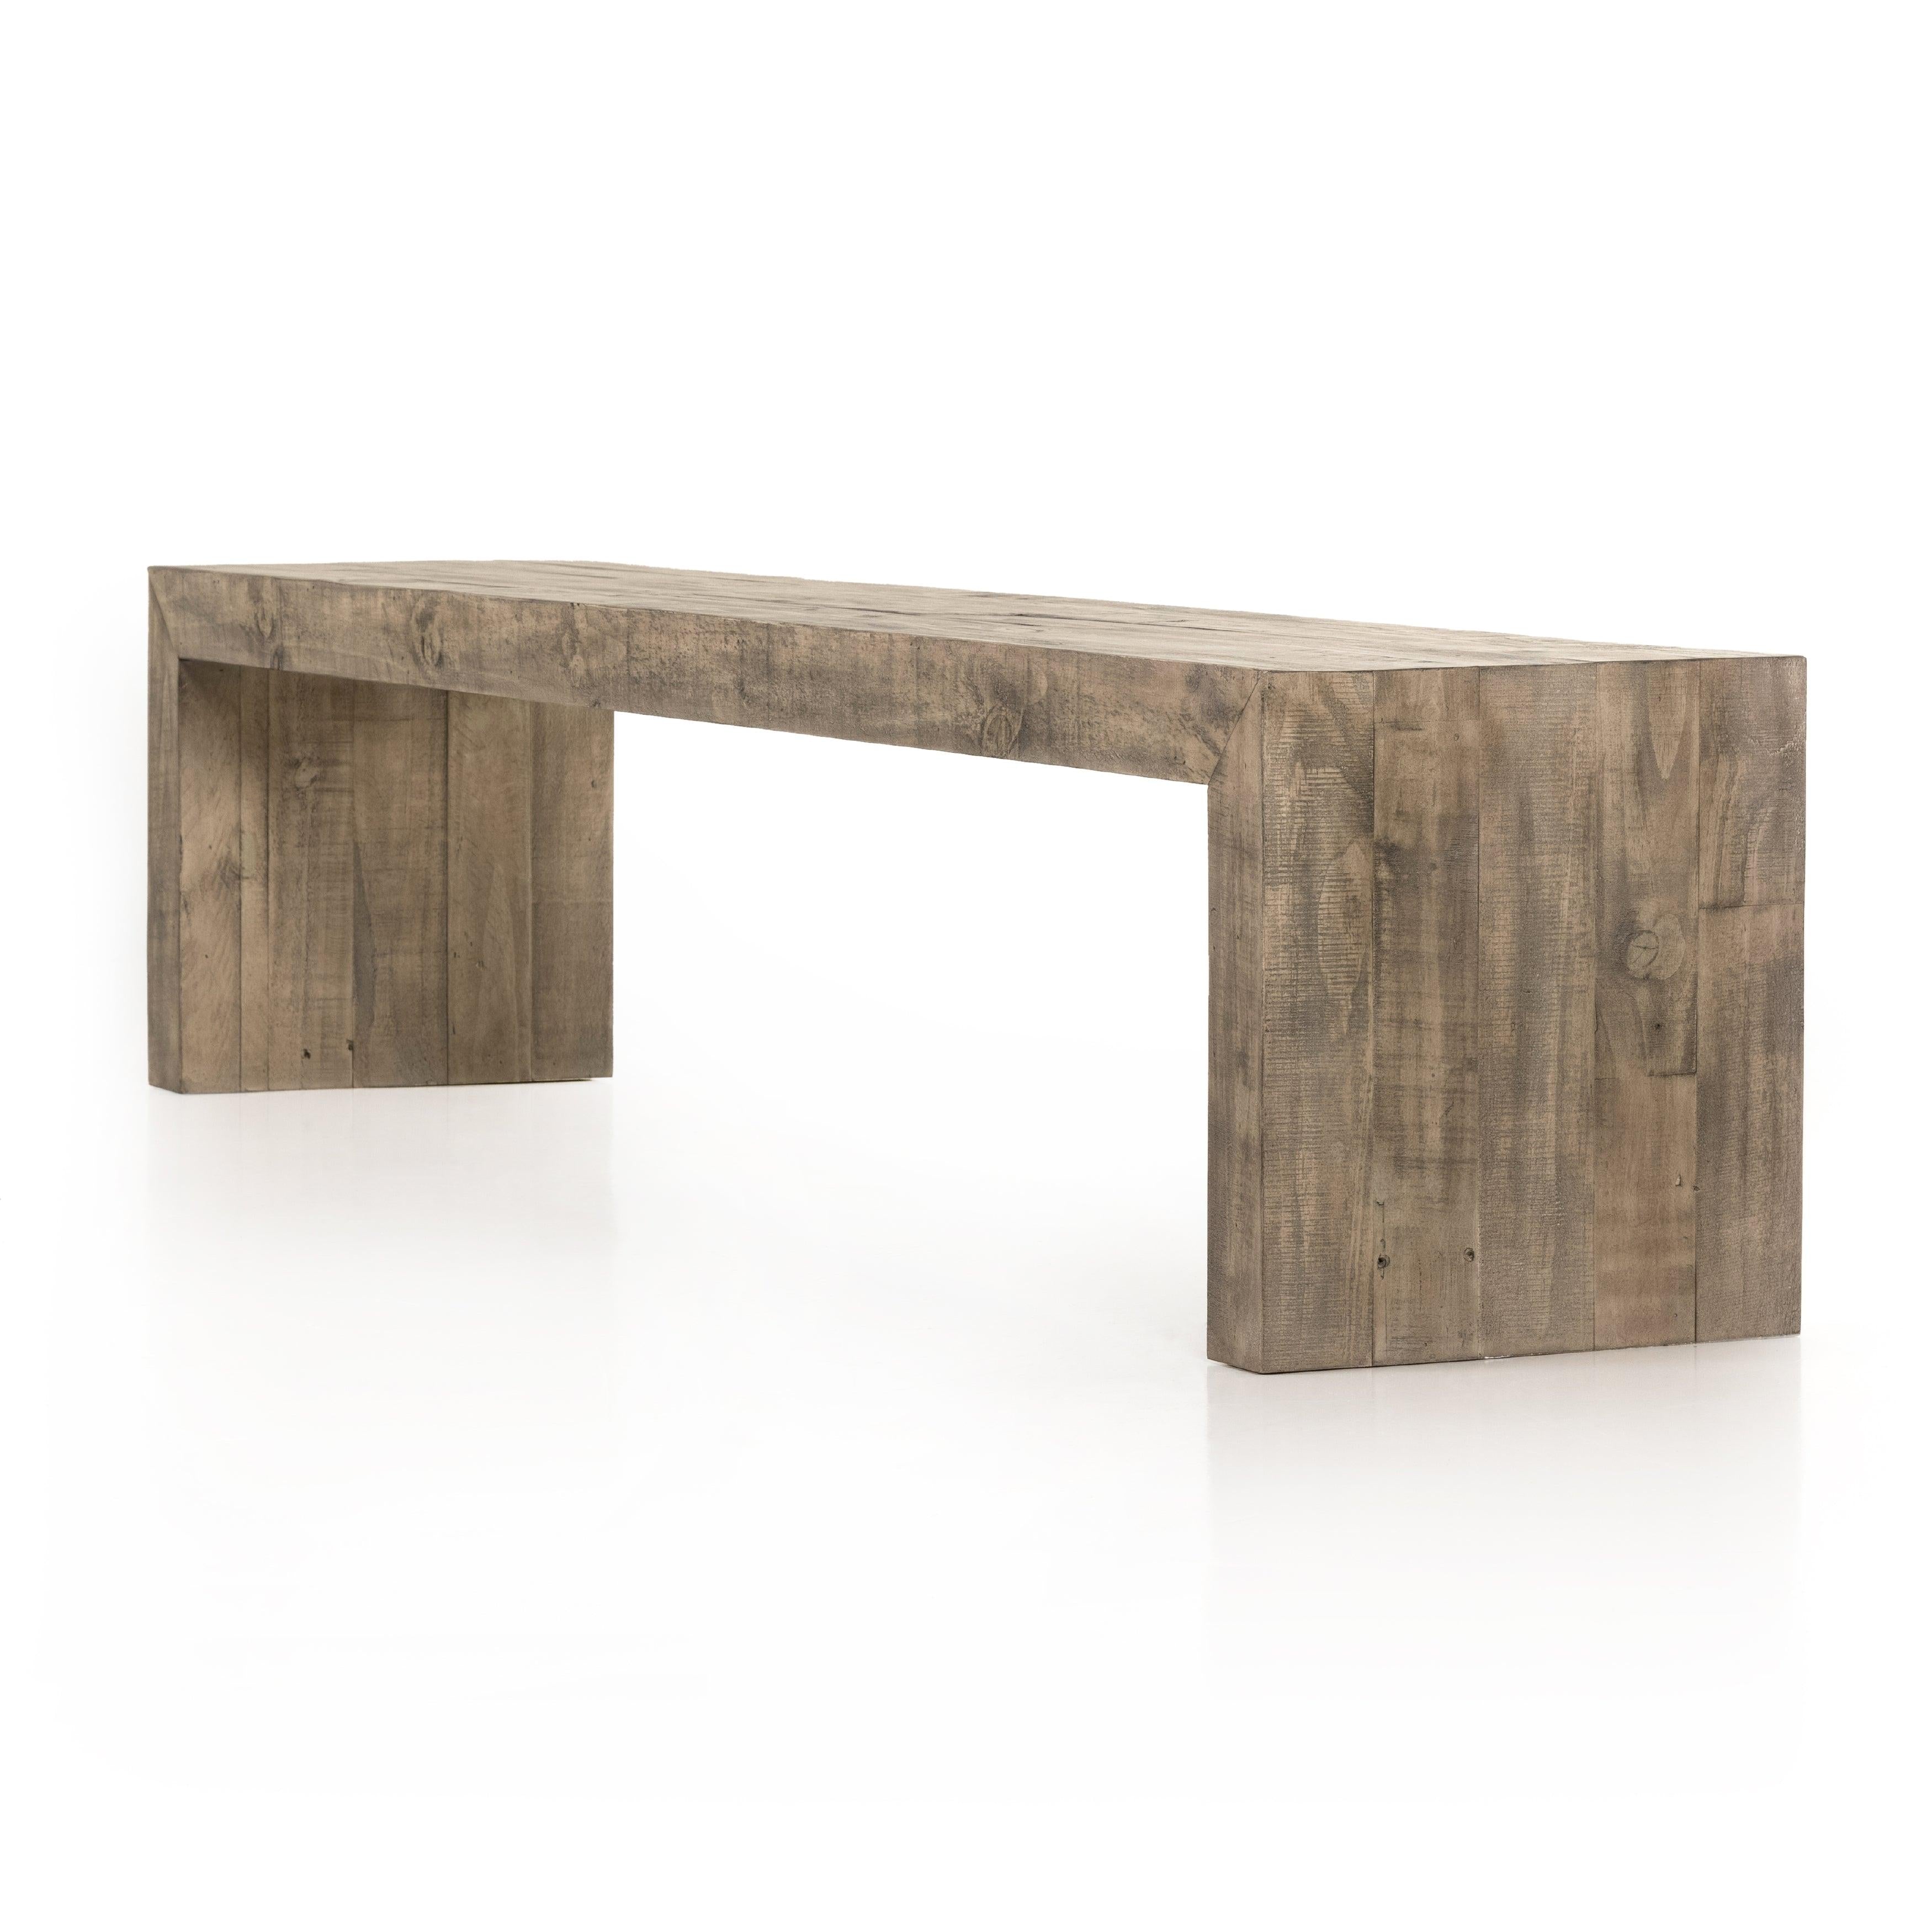 Ruskin Weathered Wheat Bench - Reimagine Designs - bench, benches, new